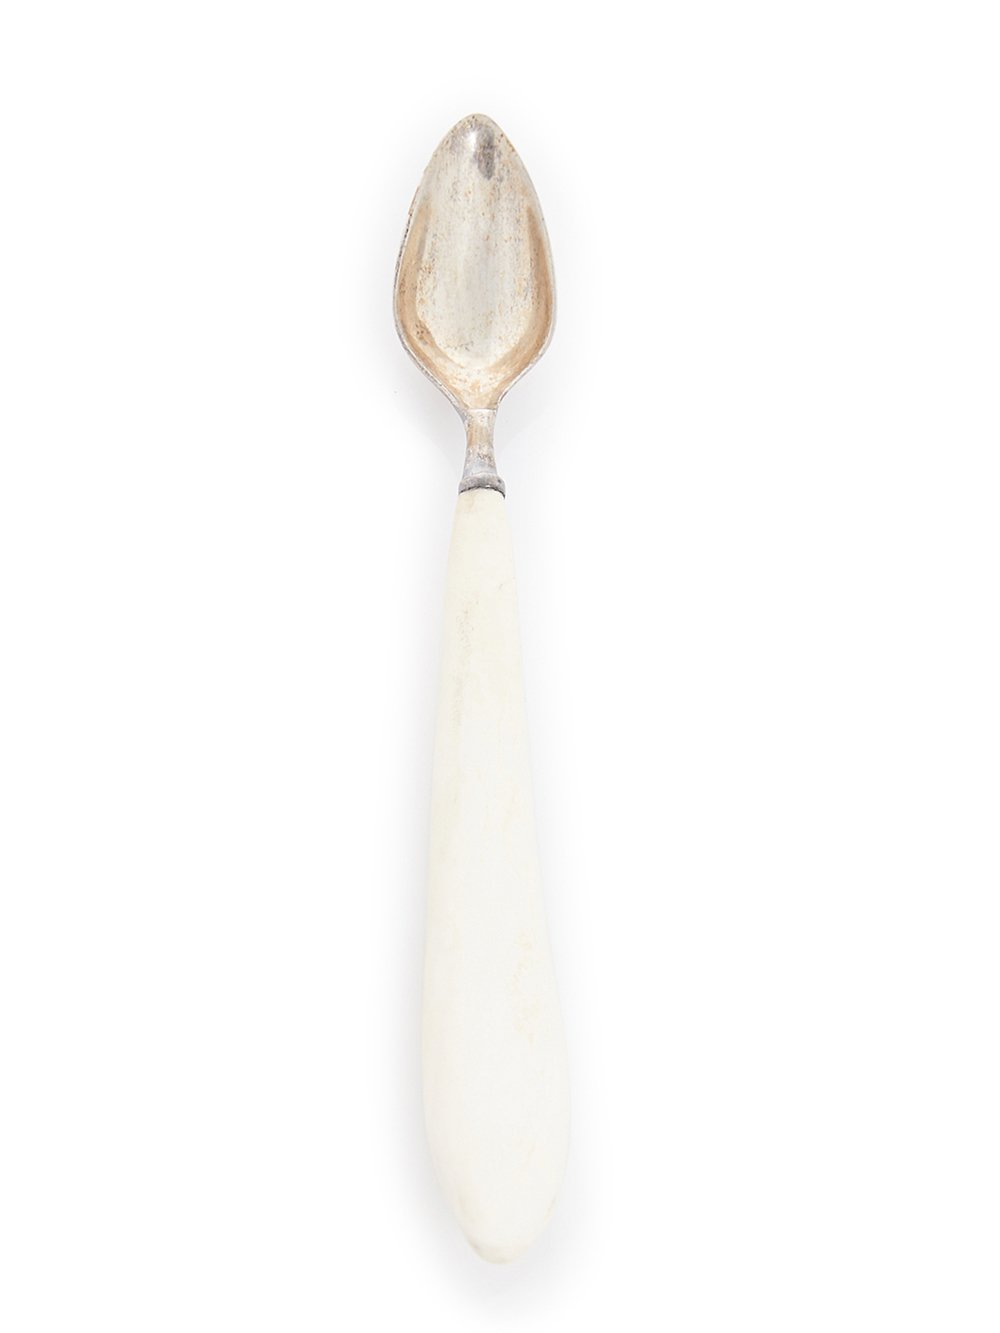 RICK OWENS DESSERT SPOON FEATURES AN OVAL SHAPE STERLING TOP AND A LONG, NATURAL COLOR BONE HANDLE.